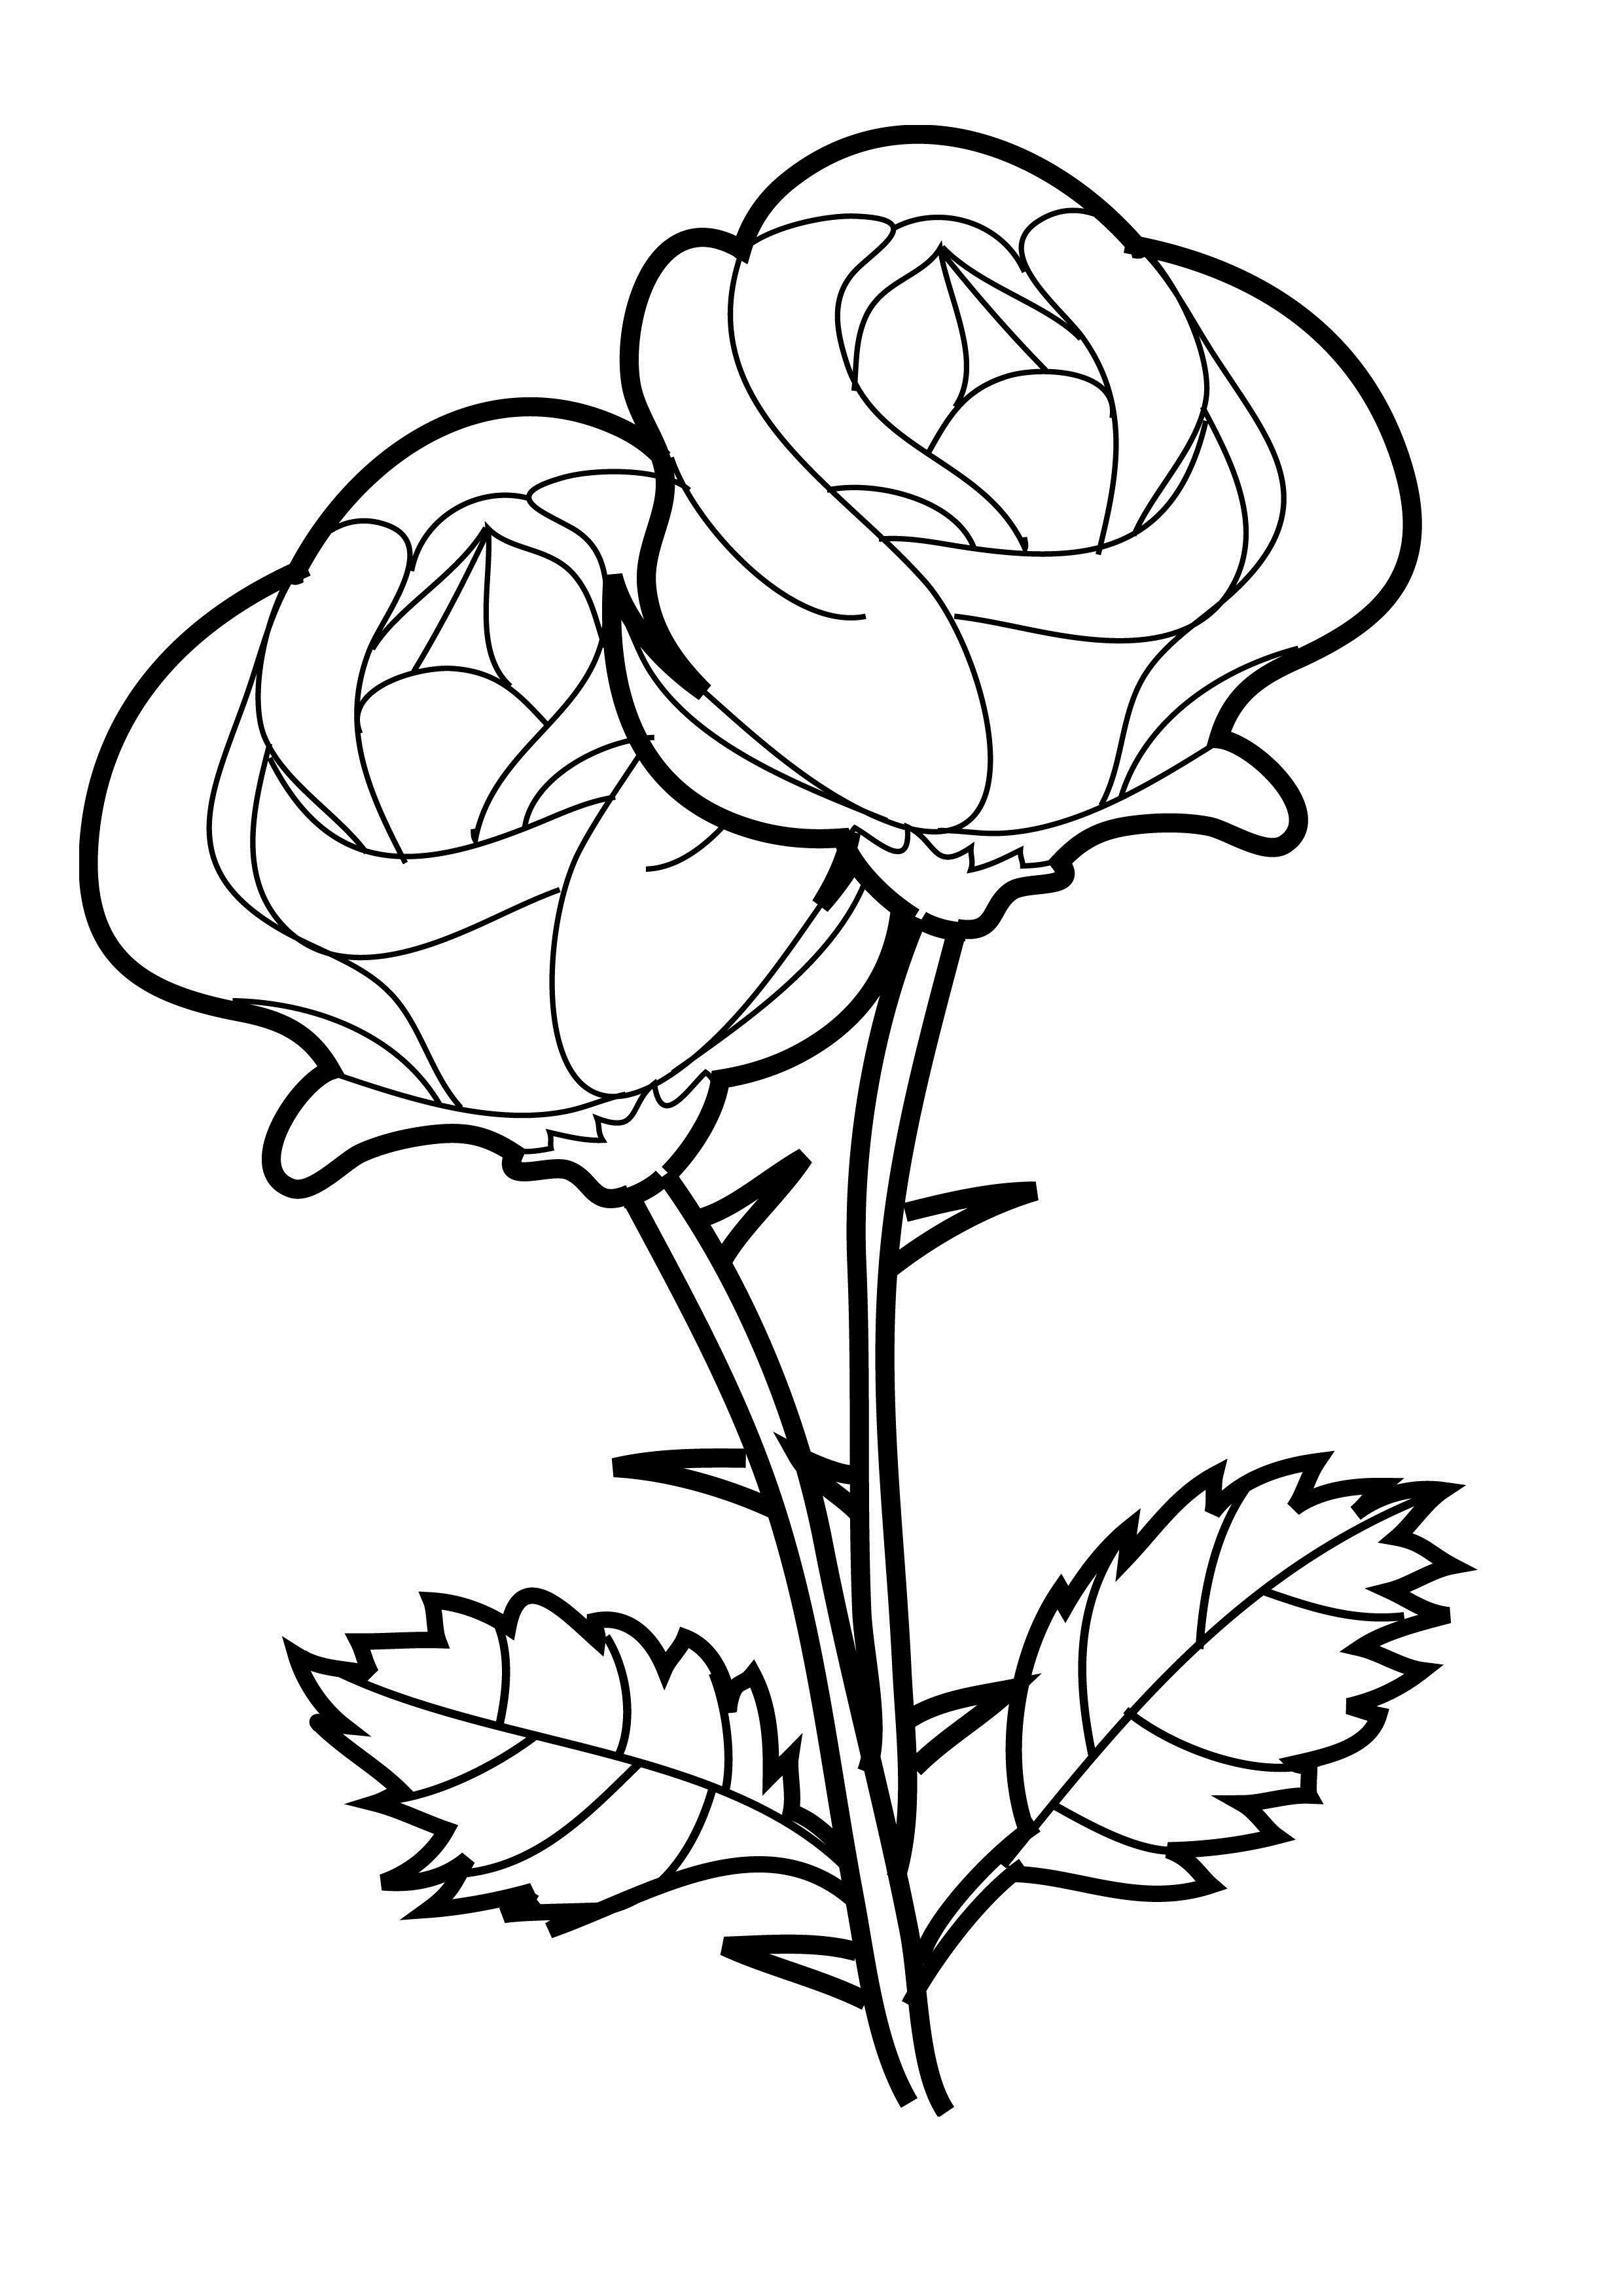 The 20 Best Ideas For Coloring Pages For Adults Roses Best 